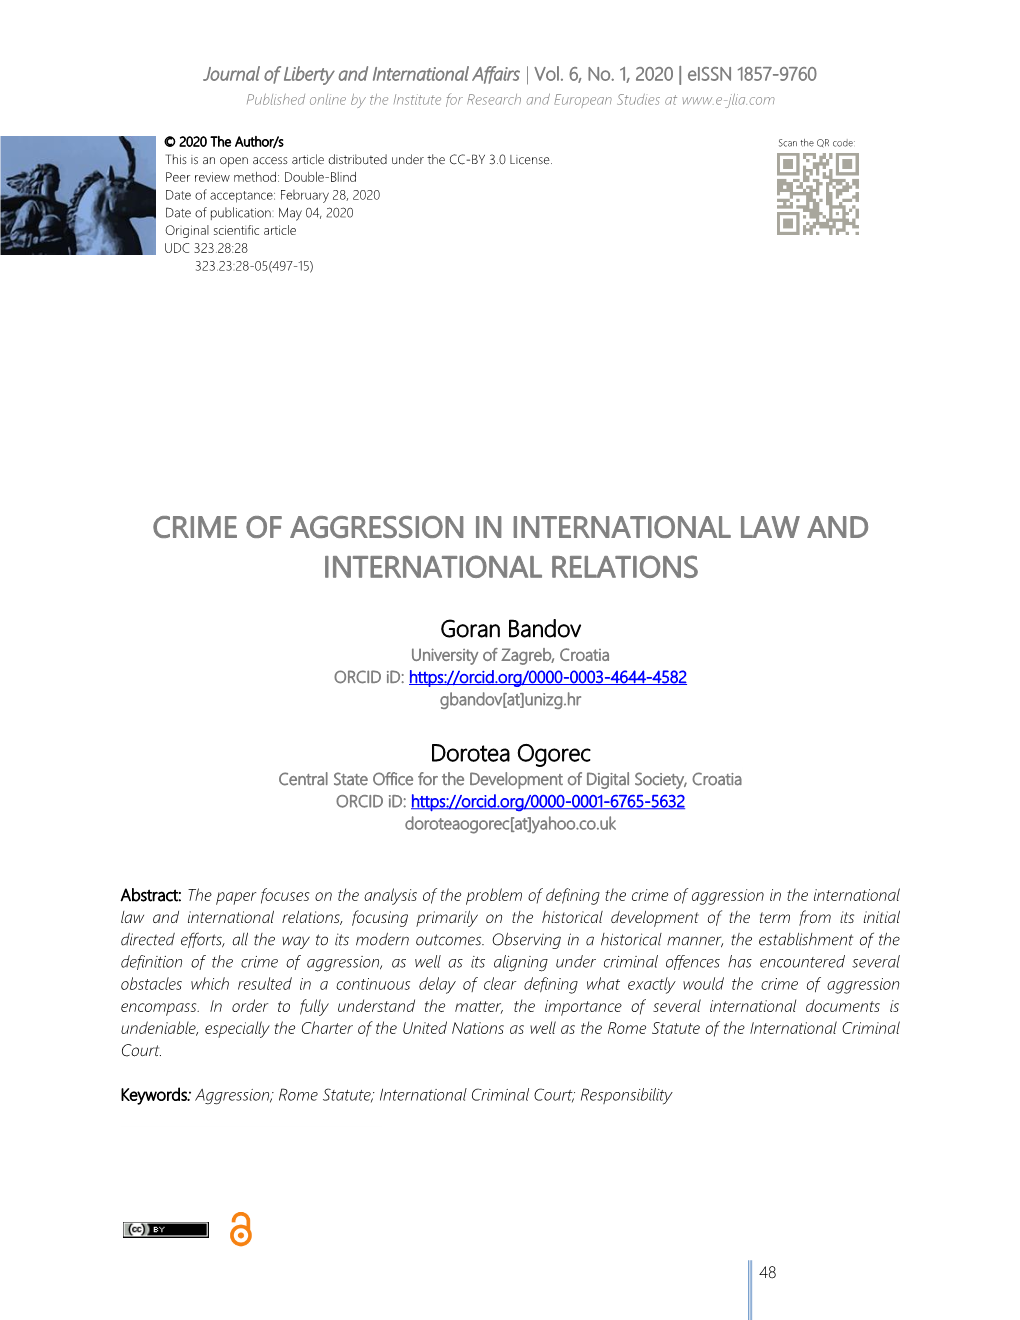 Crime of Aggression in International Law and International Relations